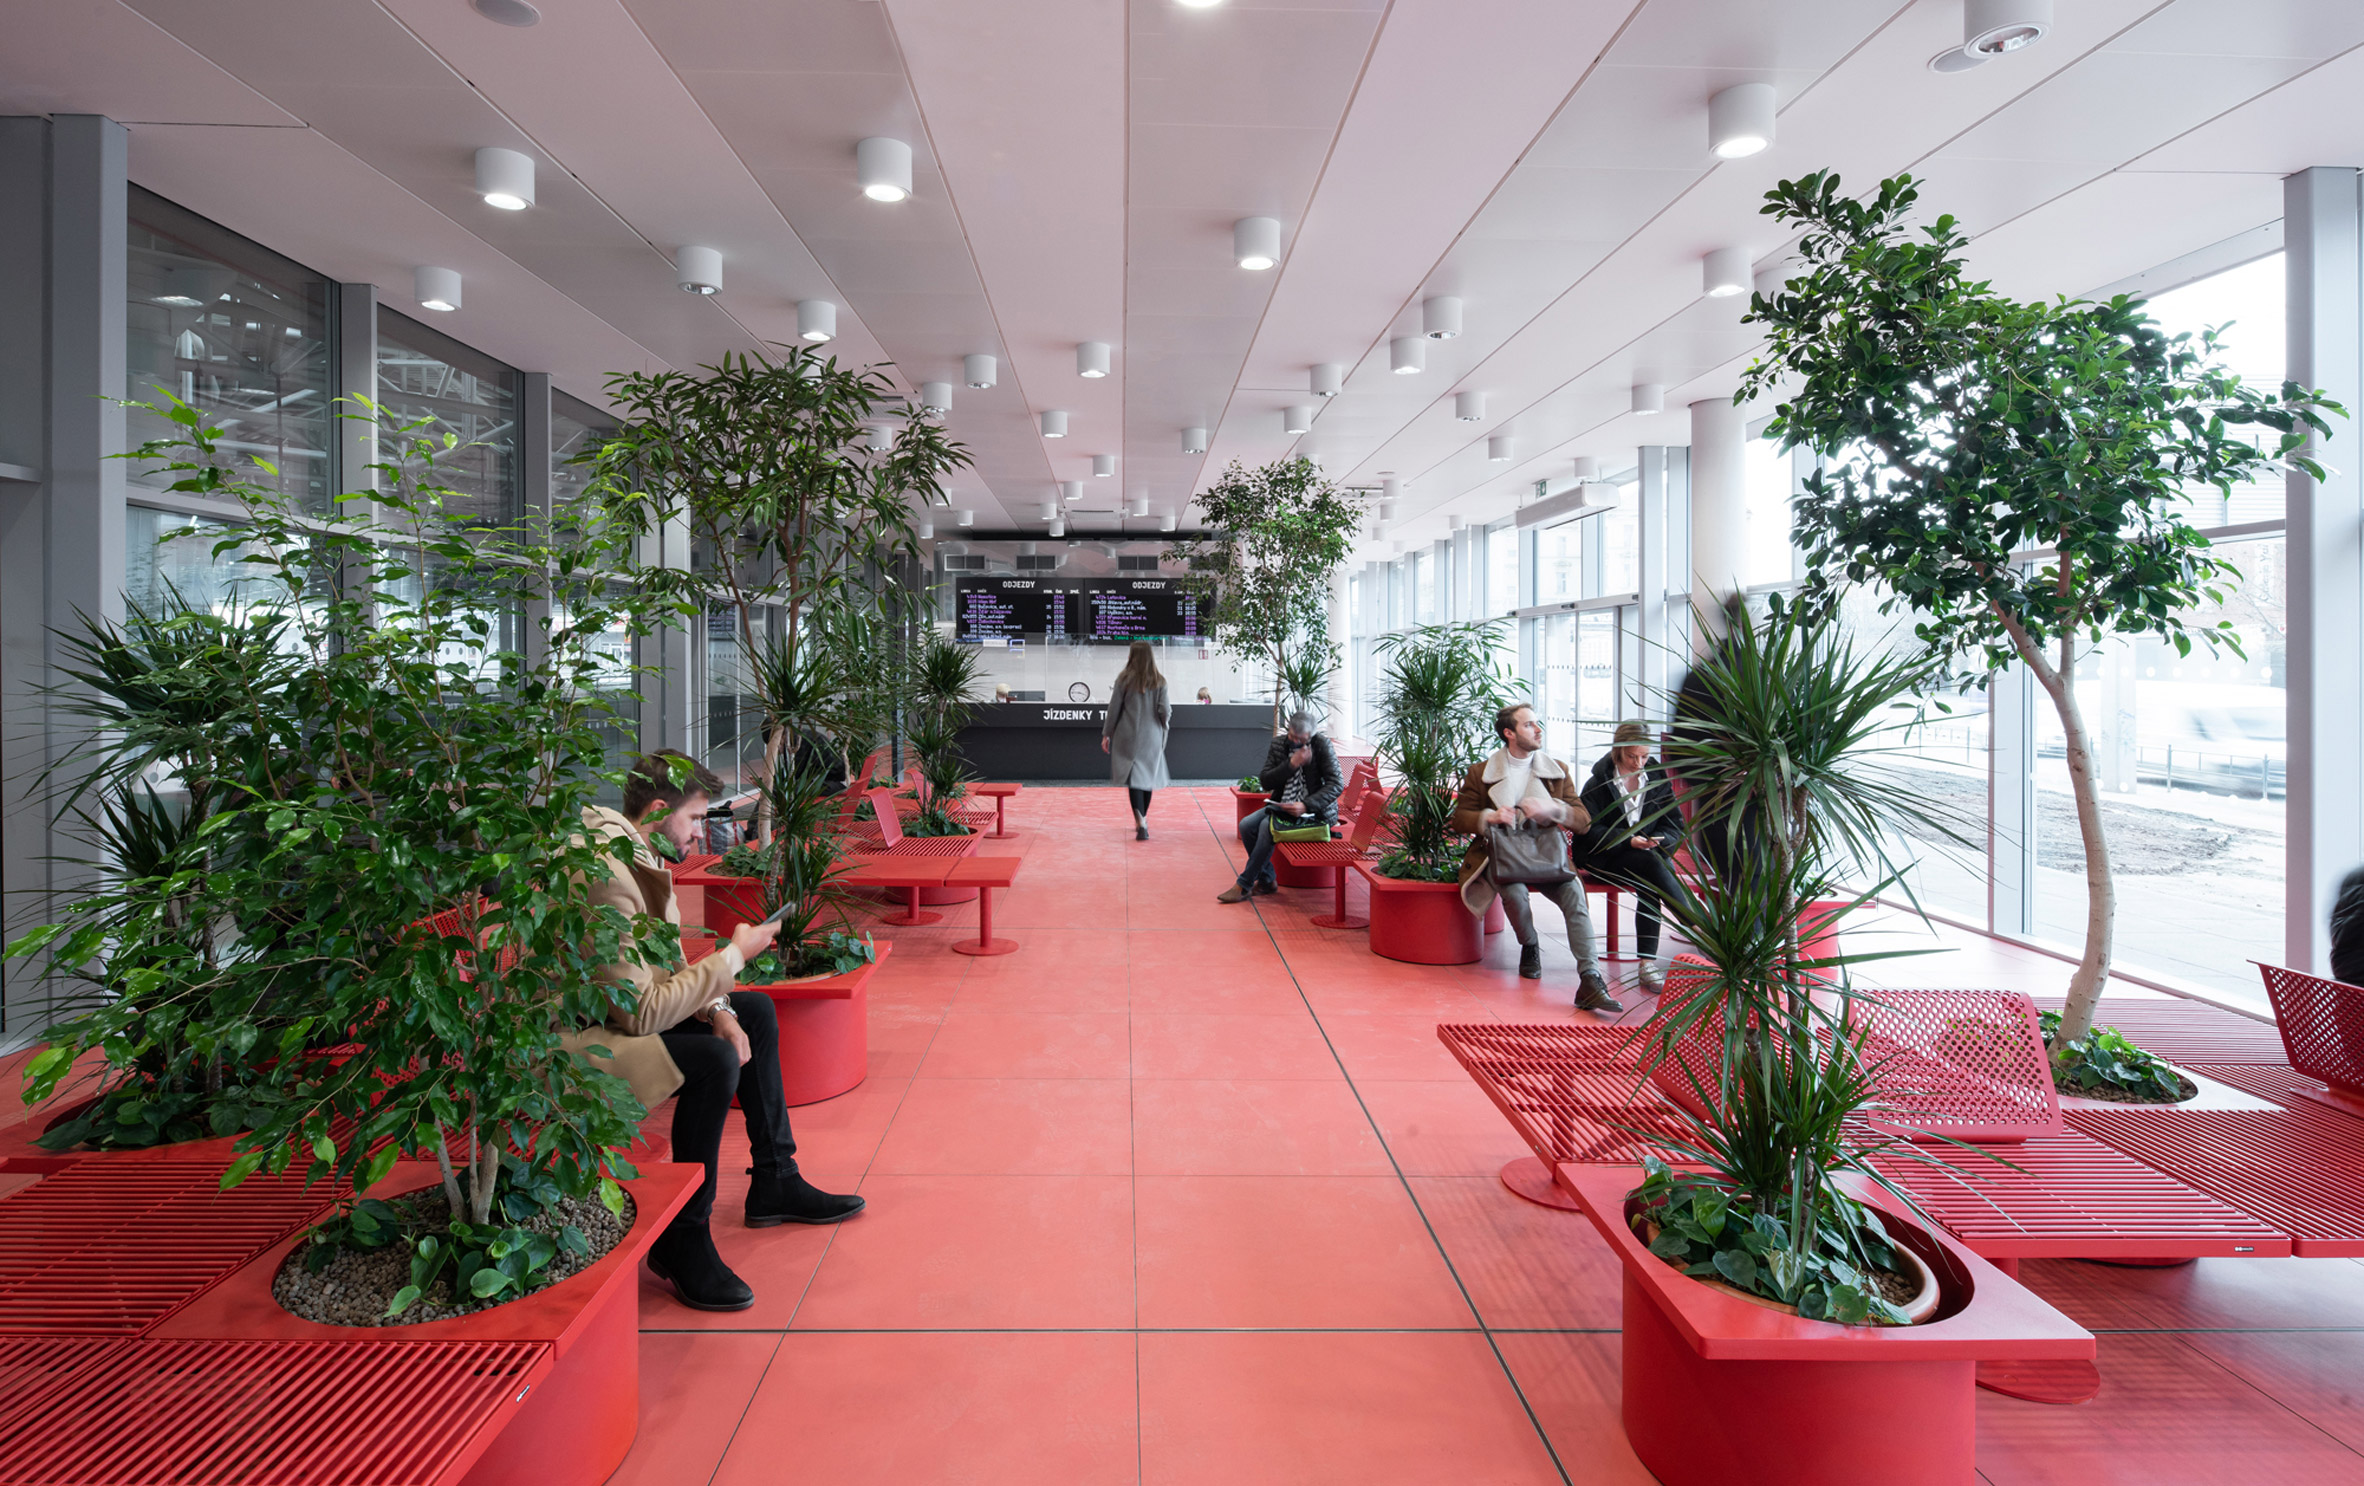 The terminal by Chybik + Kristof has red painted interiors